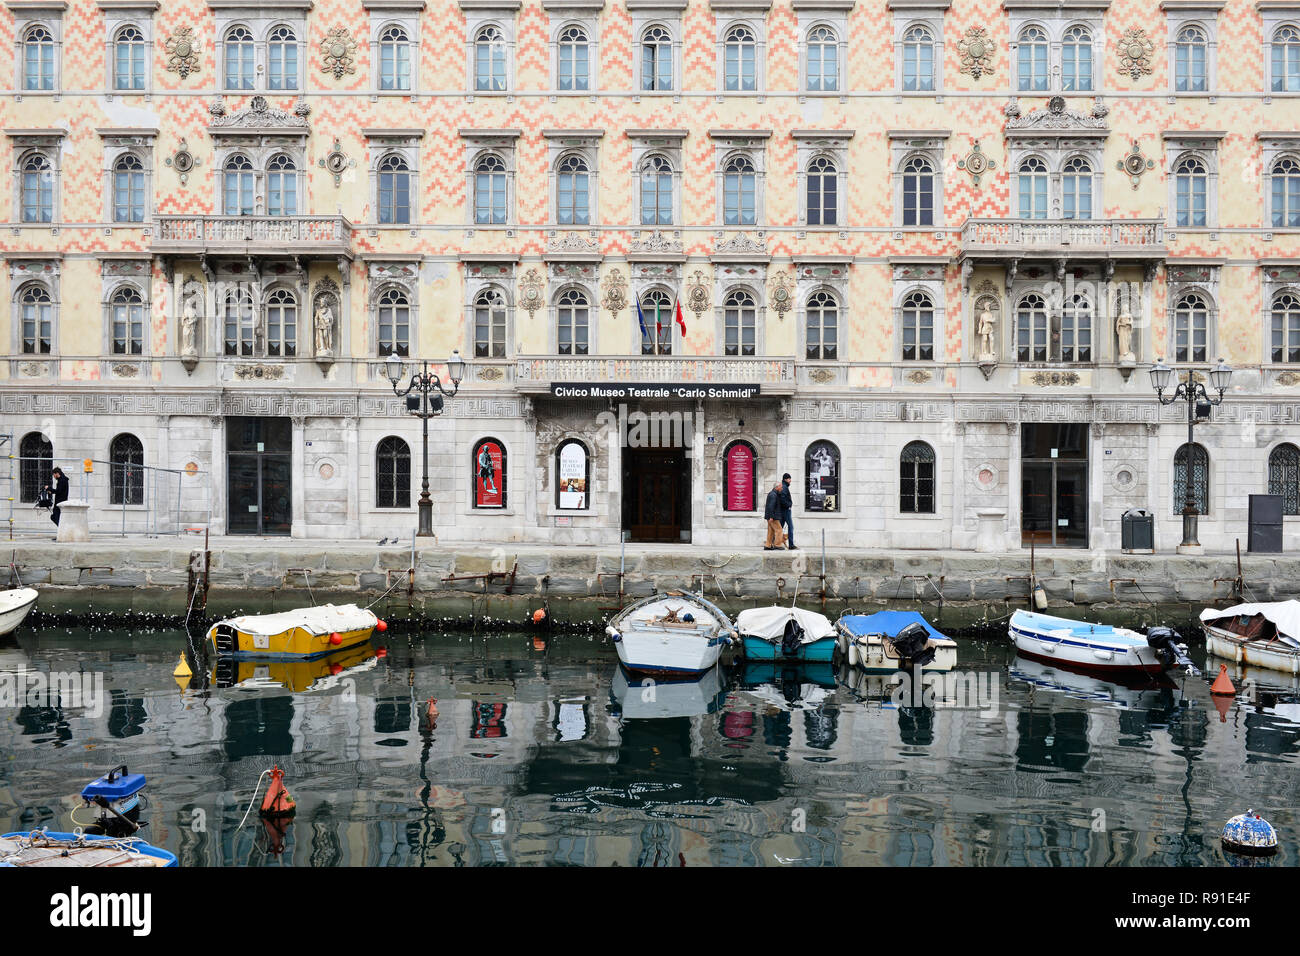 The 'Civico Museo Teatrale Carlo Schmidl' located in the Palazzo Gopcevich on the Canal Grande in the Borgo Teresiano. Trieste, Italy. Stock Photo